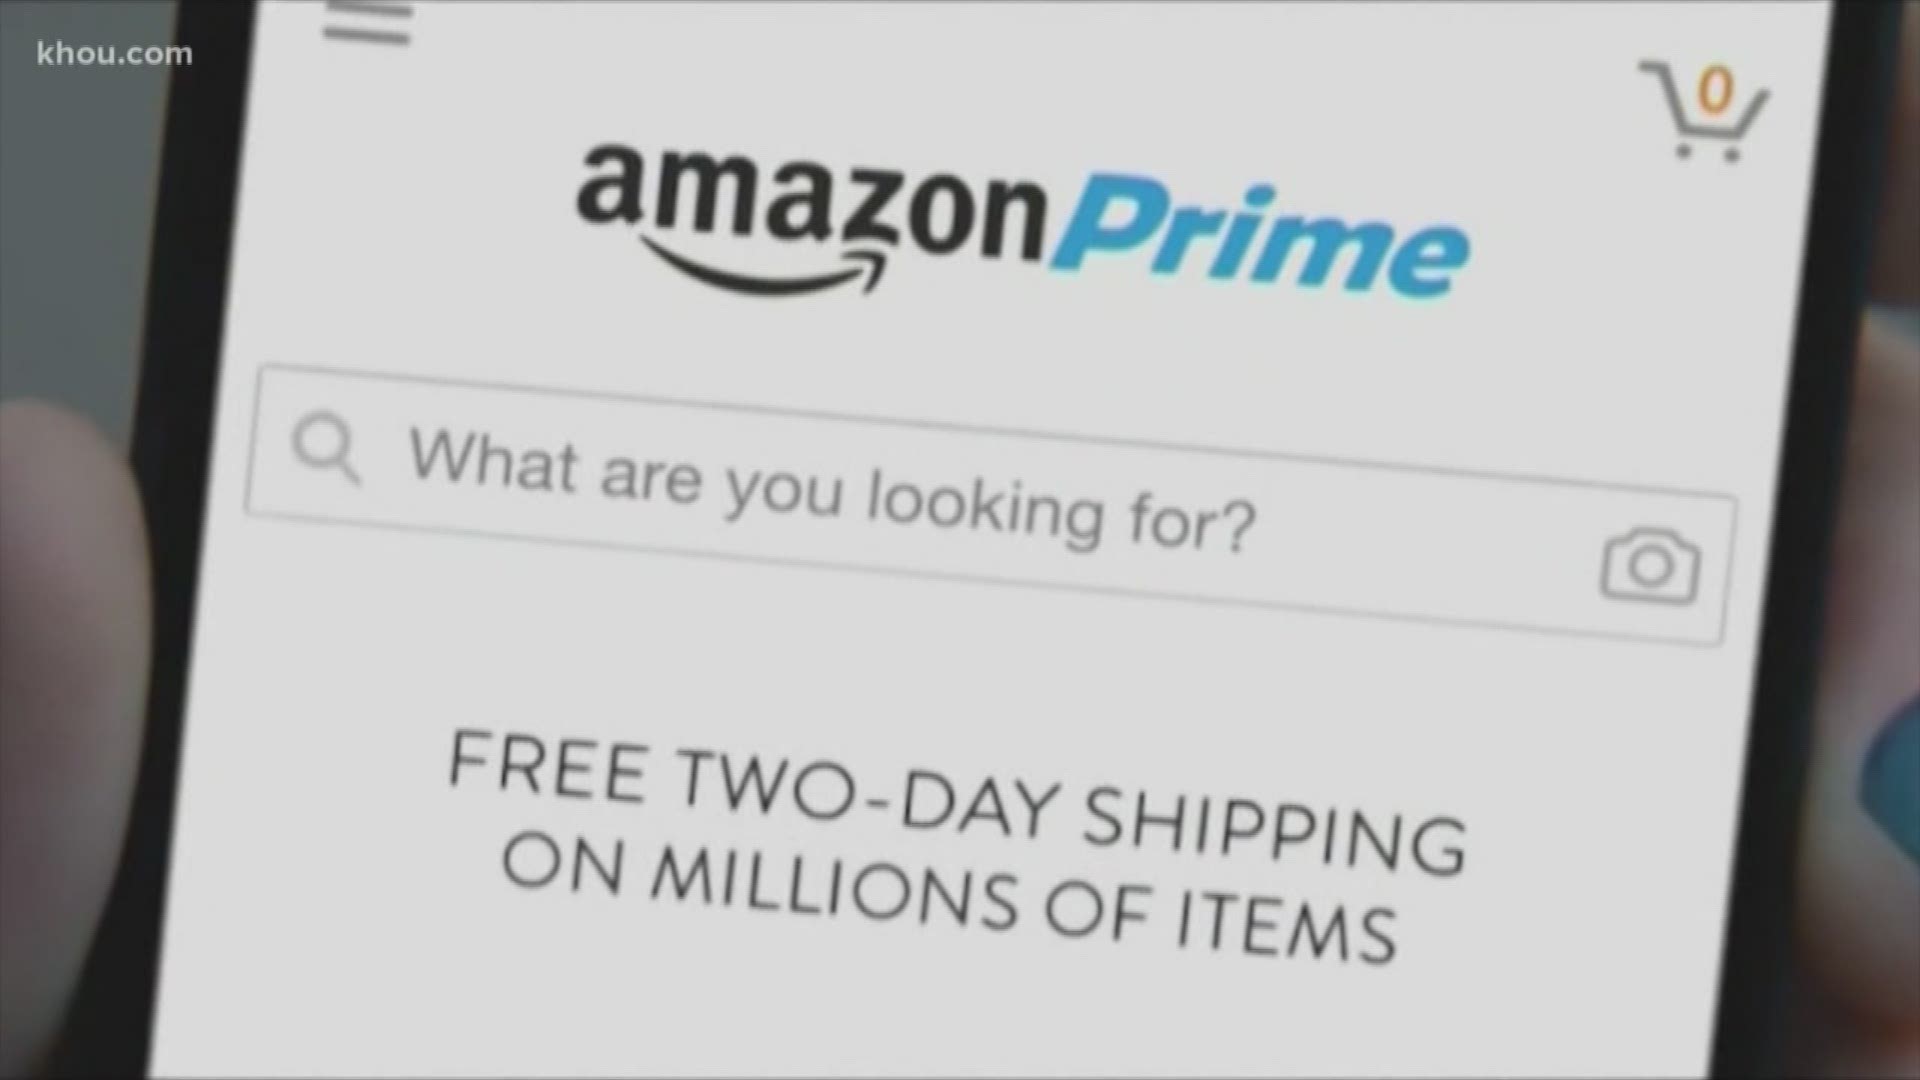 Millions of us happily pay $119 a year for Amazon Prime. That's because it's convenient and you can often receive your orders in just two days with free shipping. But one woman is among a growing number of people complaining their packages are arriving late.